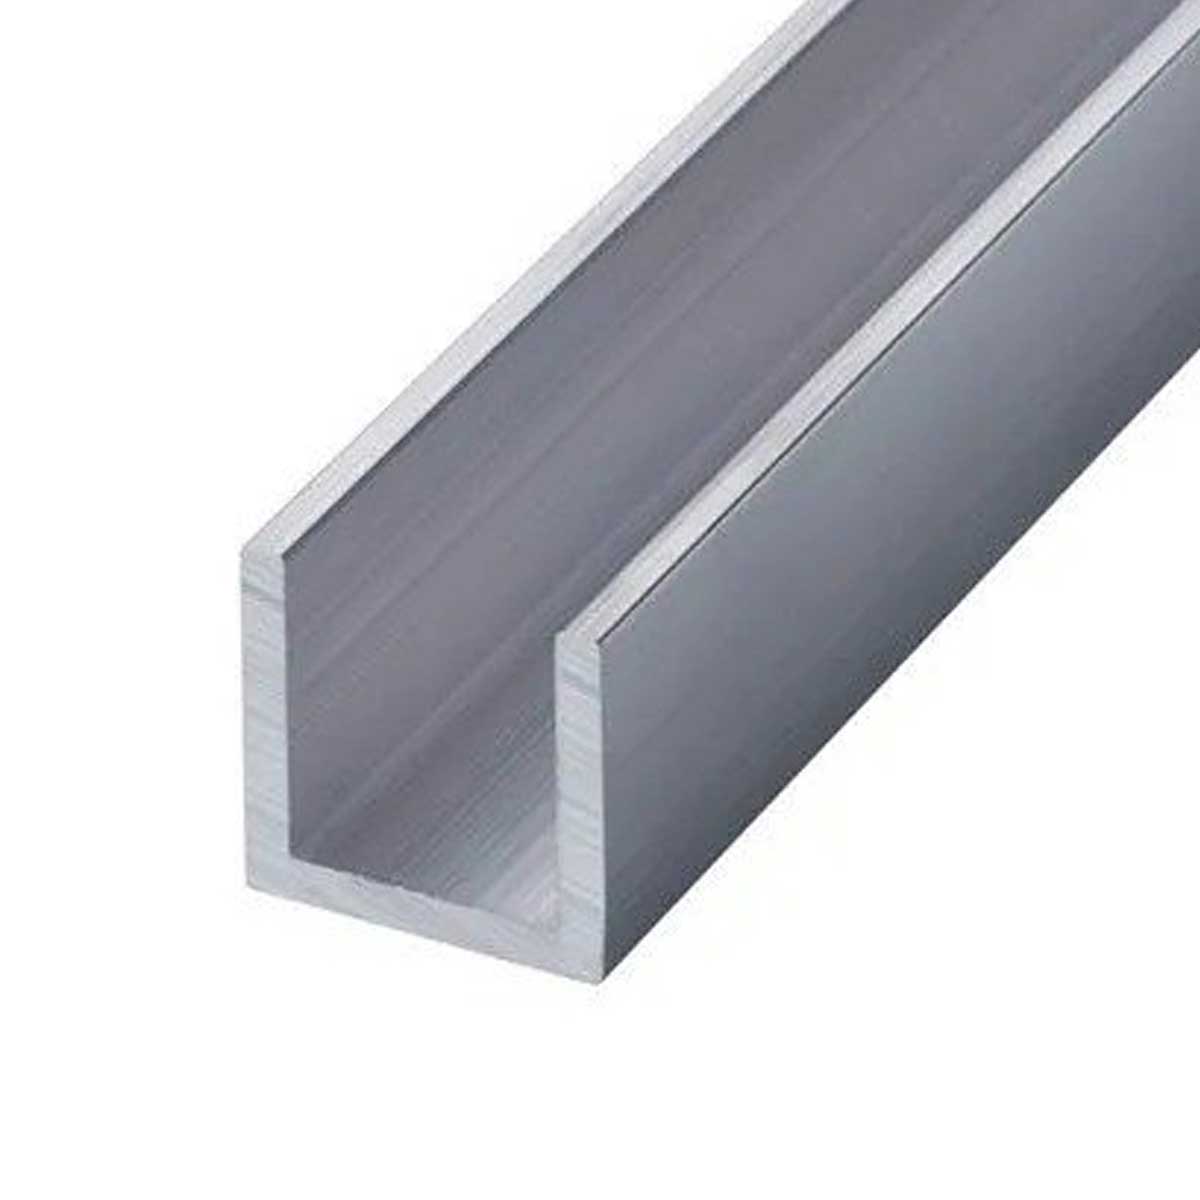 Aluminium C Channel For Construction Manufacturers, Suppliers in Chennai